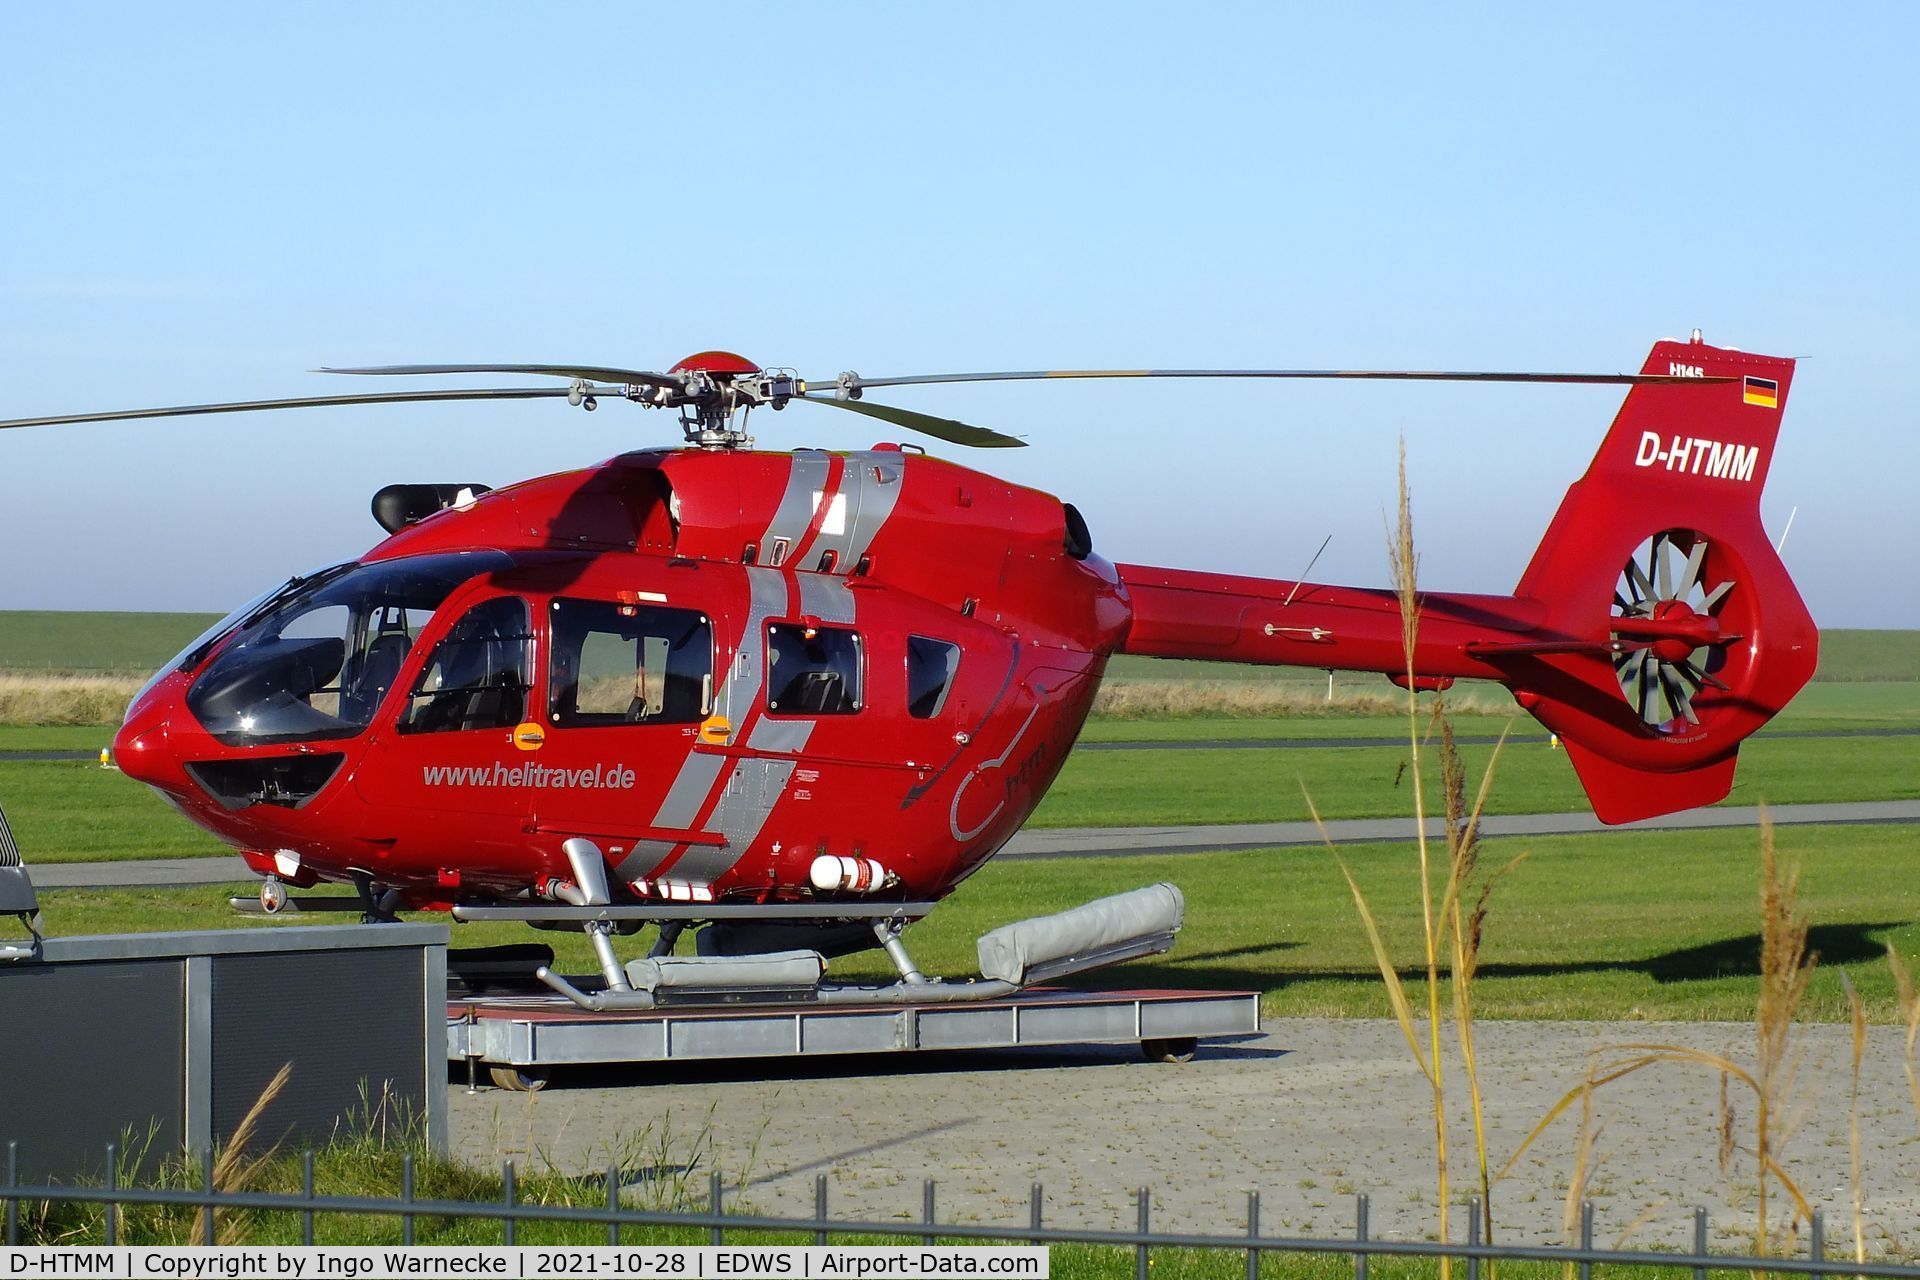 D-HTMM, 2017 Airbus Helicopters H-145 (BK-117D-2) C/N 20172, Airbus Helicopters H145 (Eurocopter EC145T2) of Helicopter Travel Munich / HTM offshore at Norden-Norddeich airfield